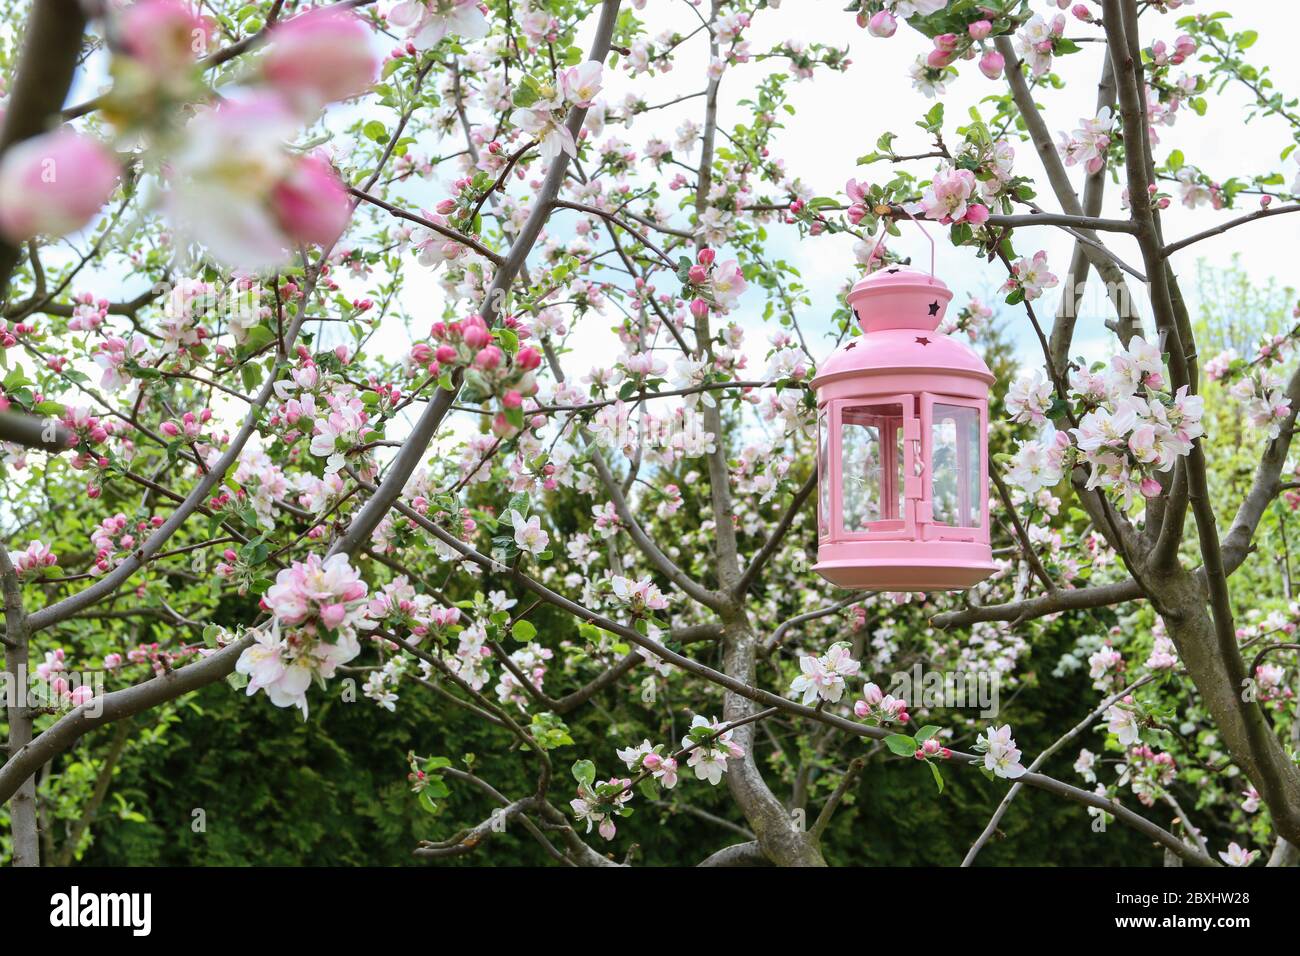 Beautiful pink lantern is hanging on a blooming apple tree branch in the garden. Outdoor party decoration. Stock Photo